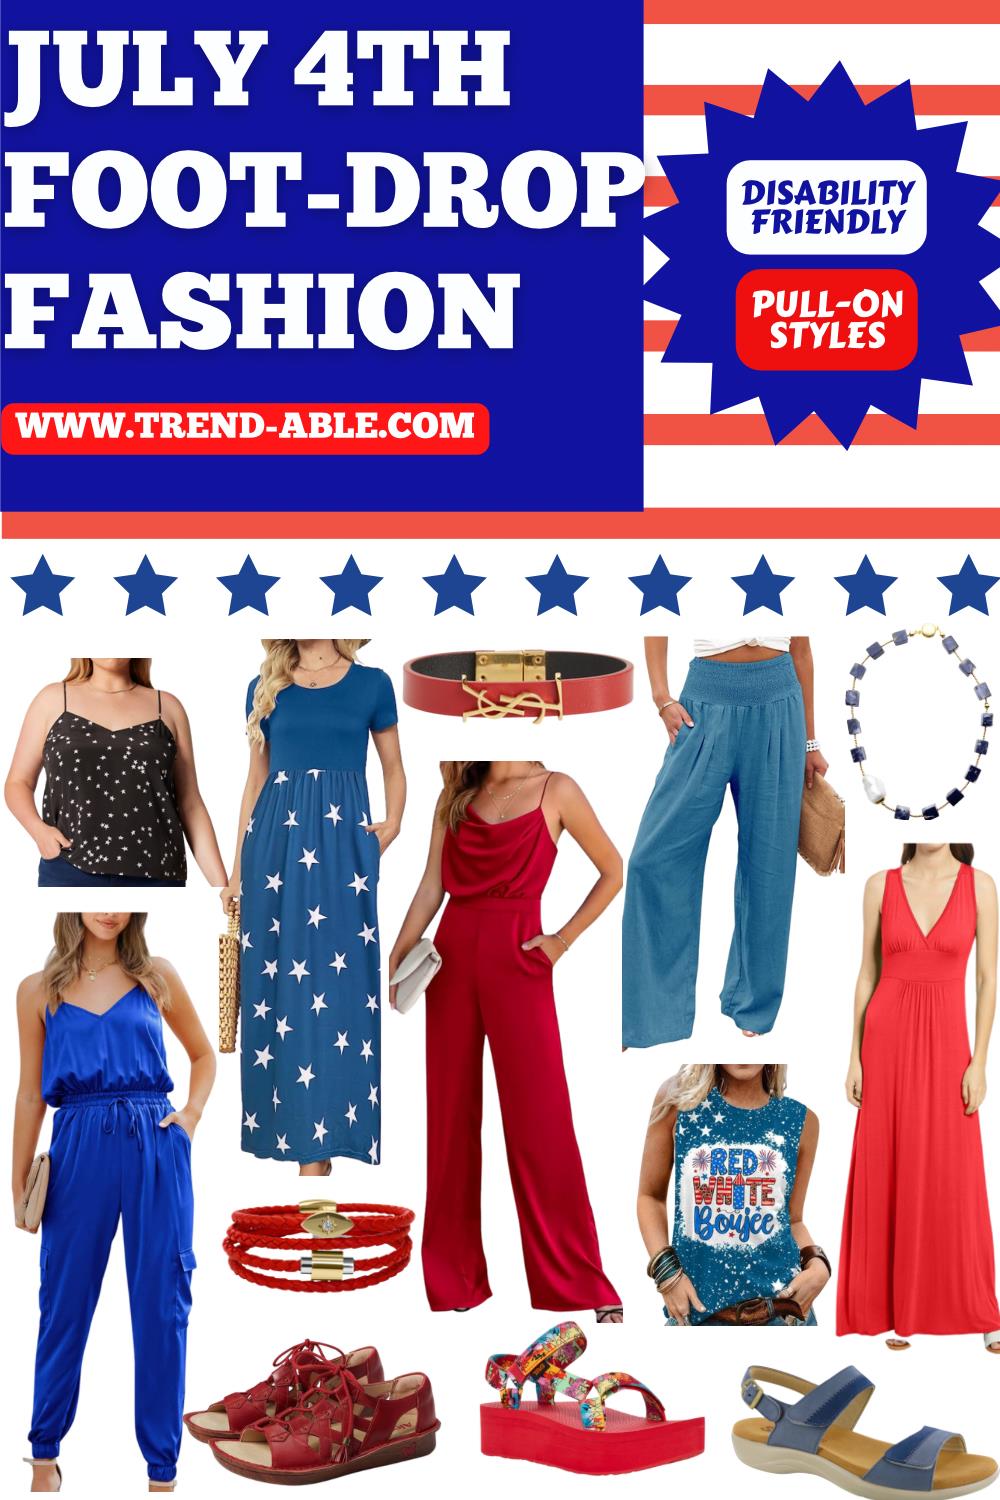 The Hottest & Coolest (Pun Intended) Disability-Friendly Outfits, AFO friendly Shoes & Cooling Products For July 4th & All Summer Long